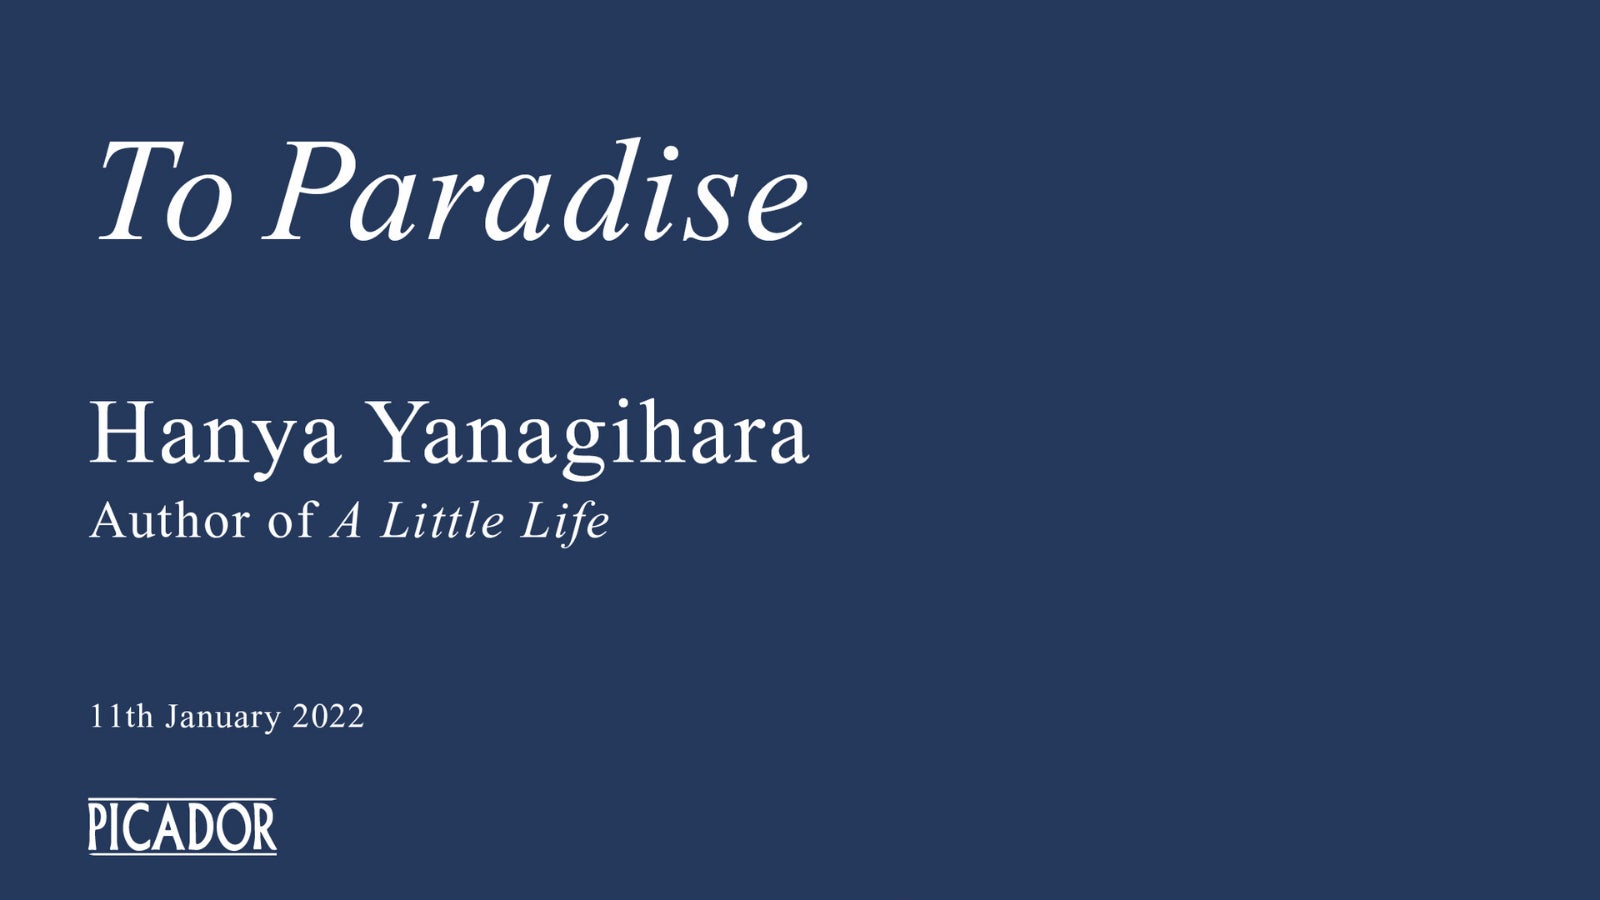 The following words, sitting on a blue background: To Paradise, Hanya Yanagihara, Author of A Little Life, 11th January 2022, PICADOR